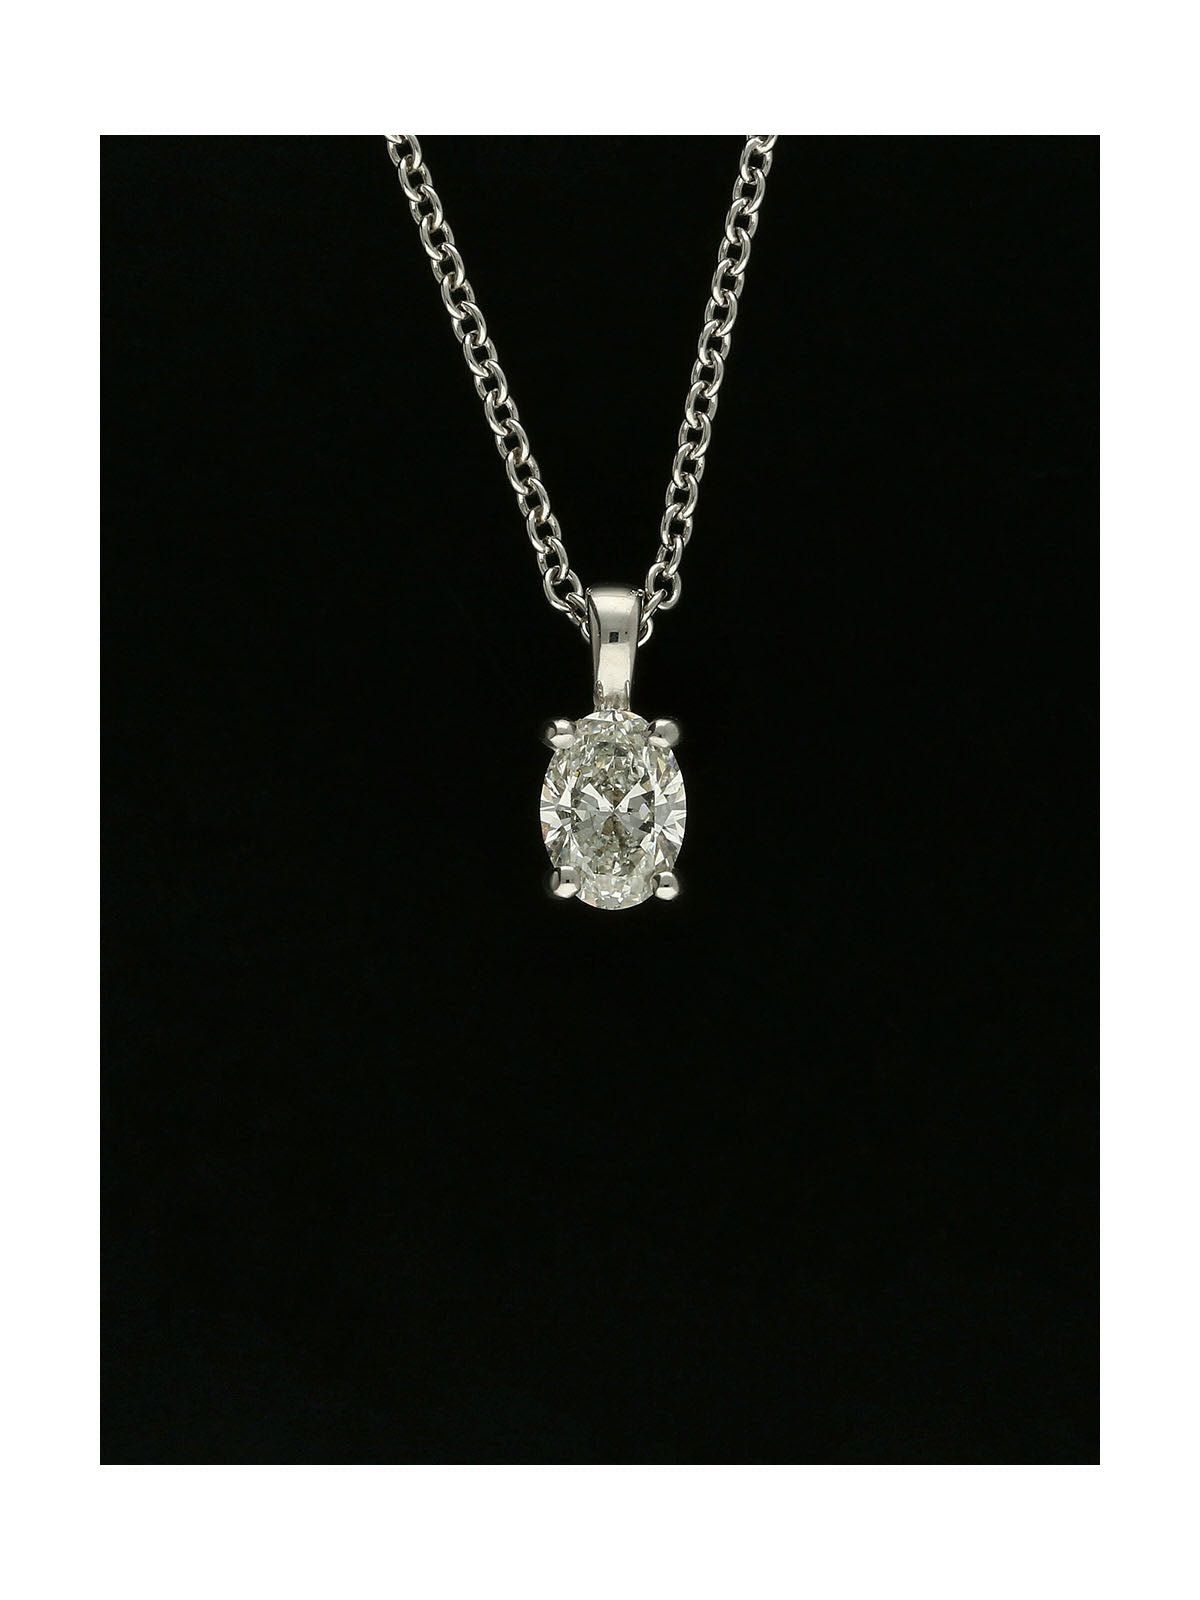 Diamond Oval Cut 0.40ct Solitaire Pendant Necklace in 18ct White Gold